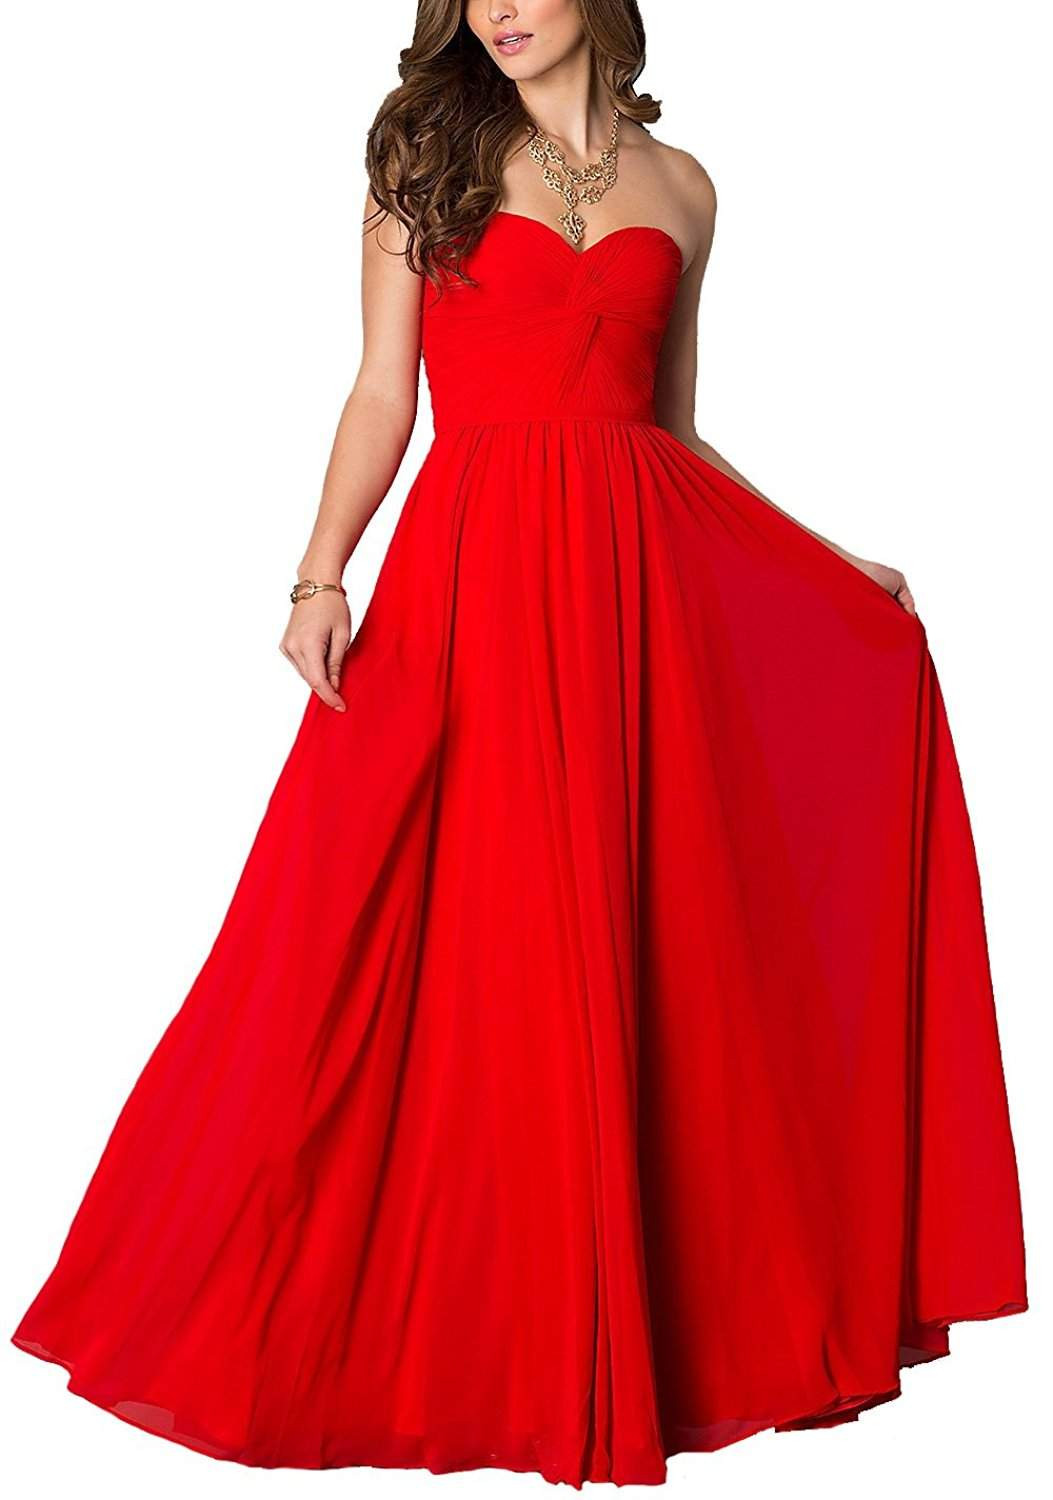 Red Wedding Gowns
 Top 25 Best Red Wedding Dresses